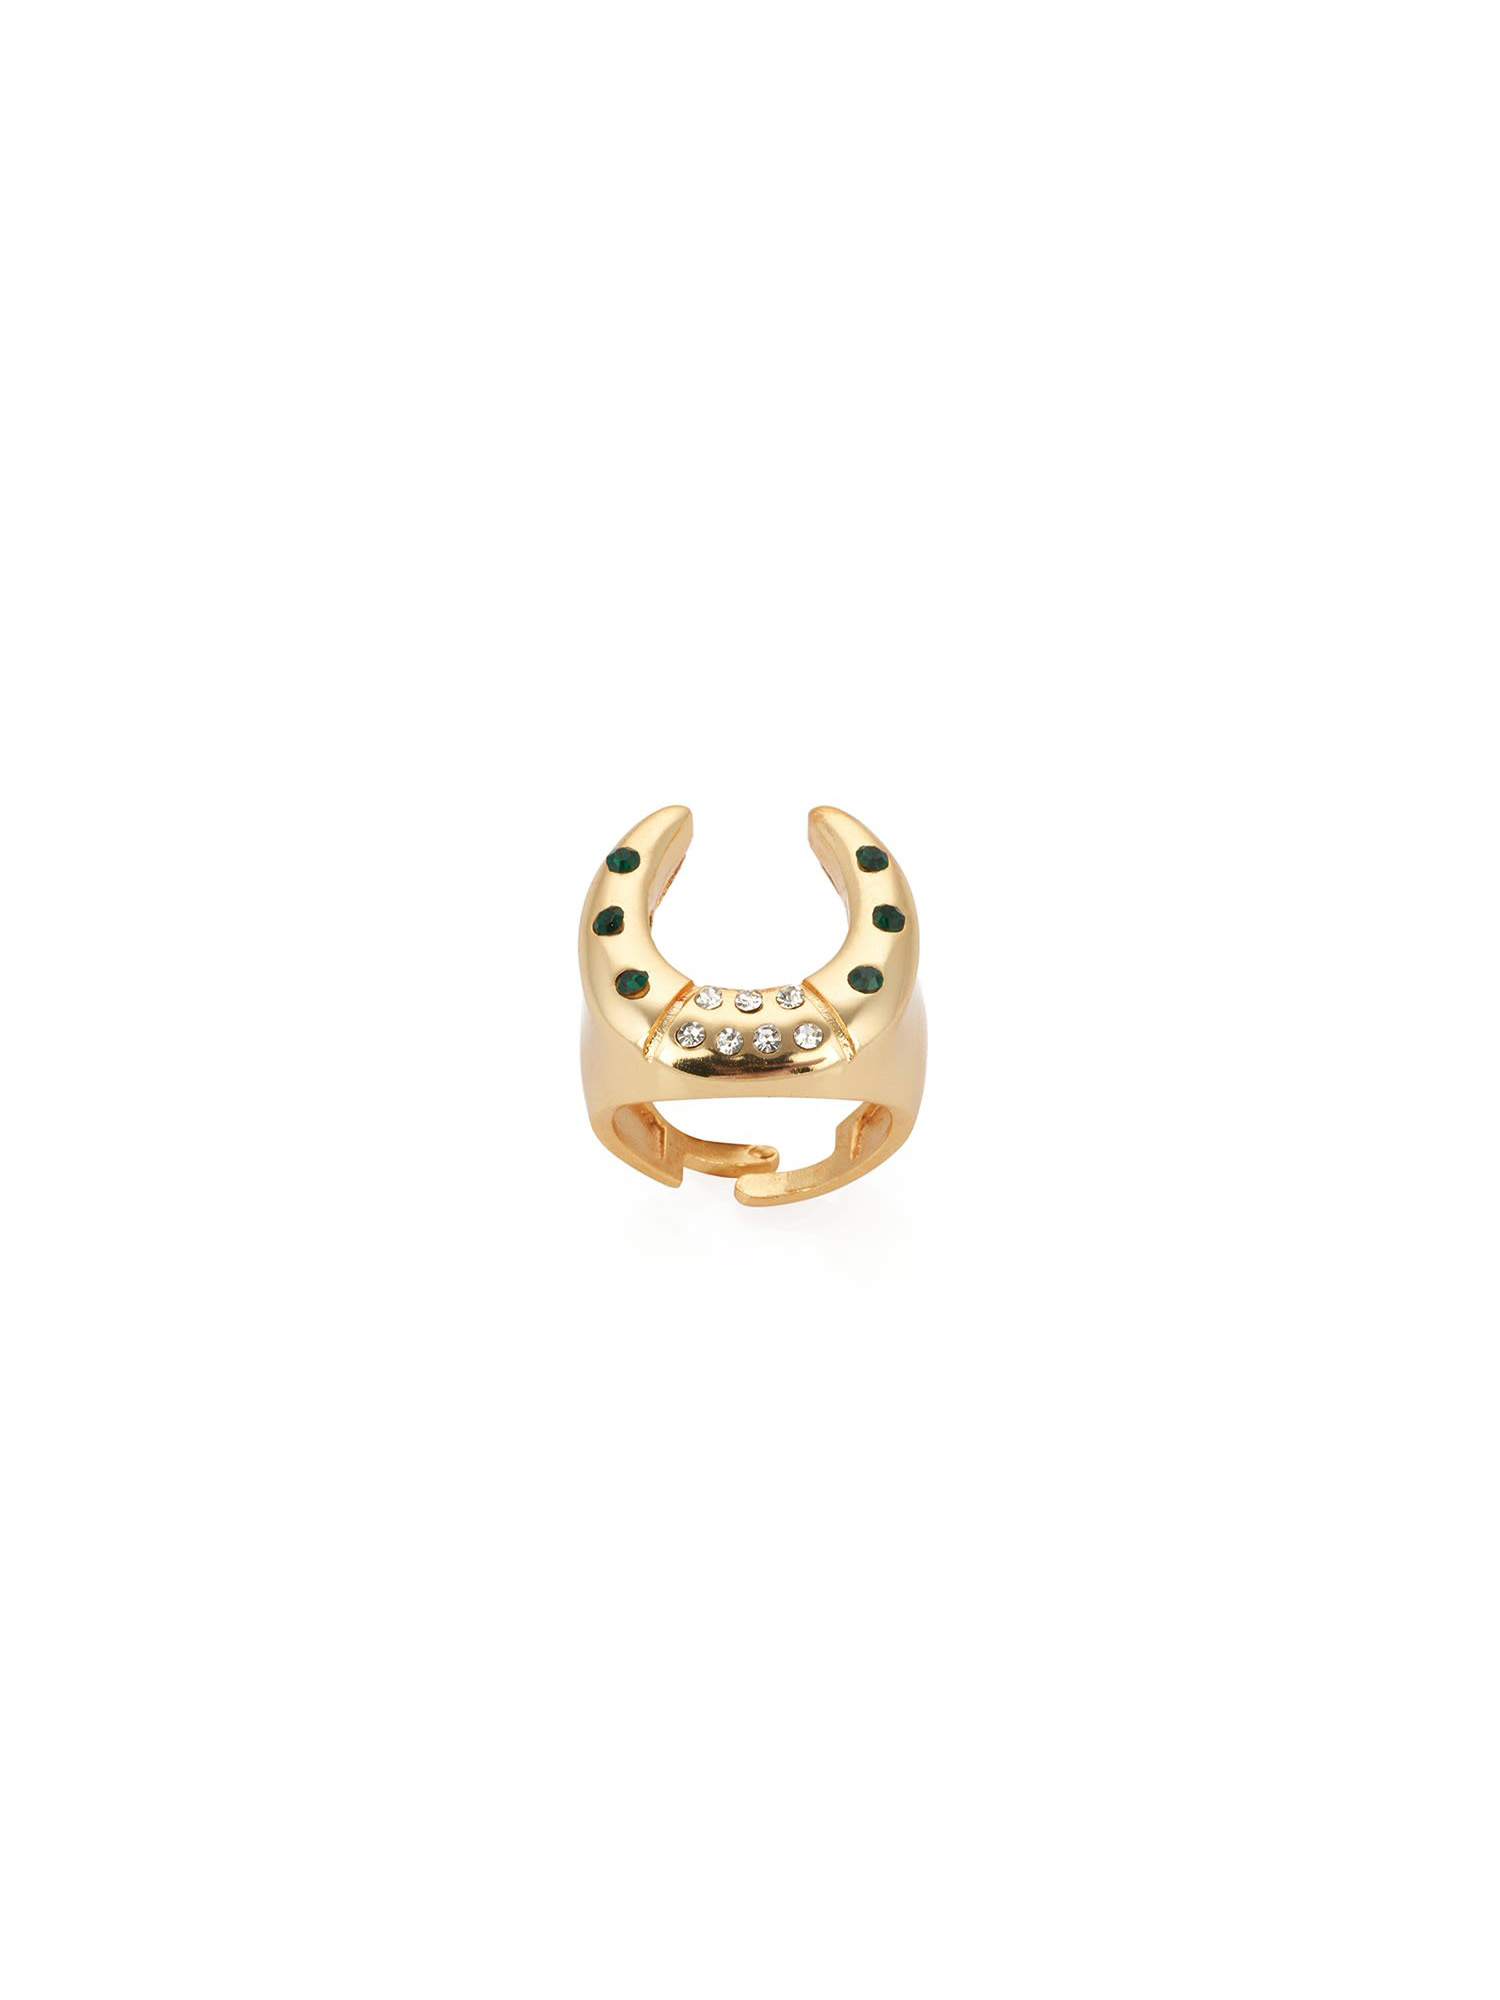 THE VANDAL RING GOLD